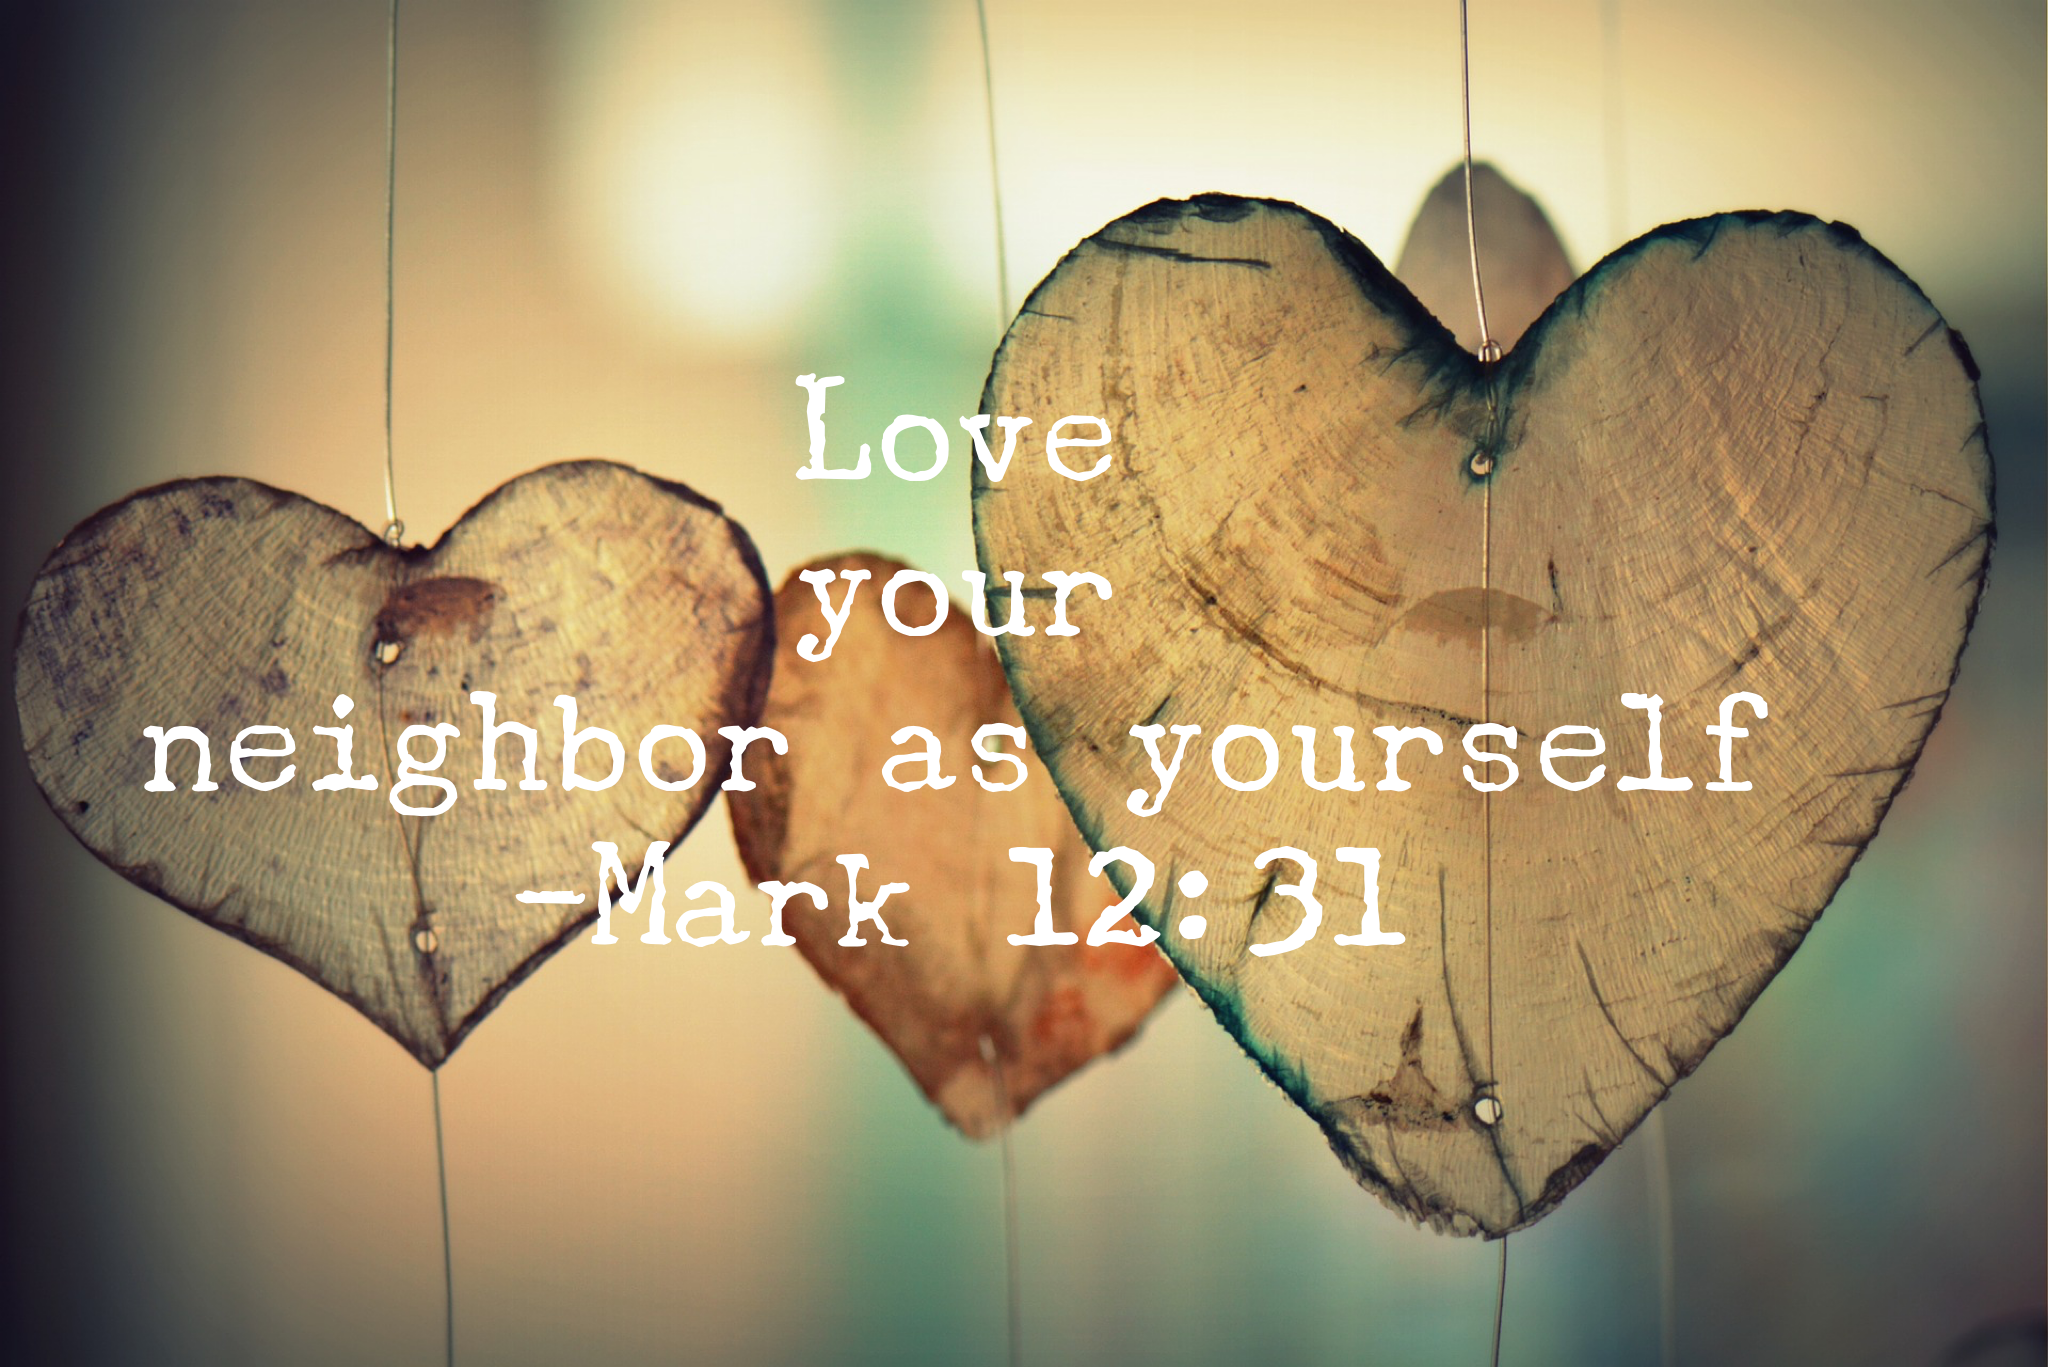 Love your neighbor as yourself…But what if you hate yourself